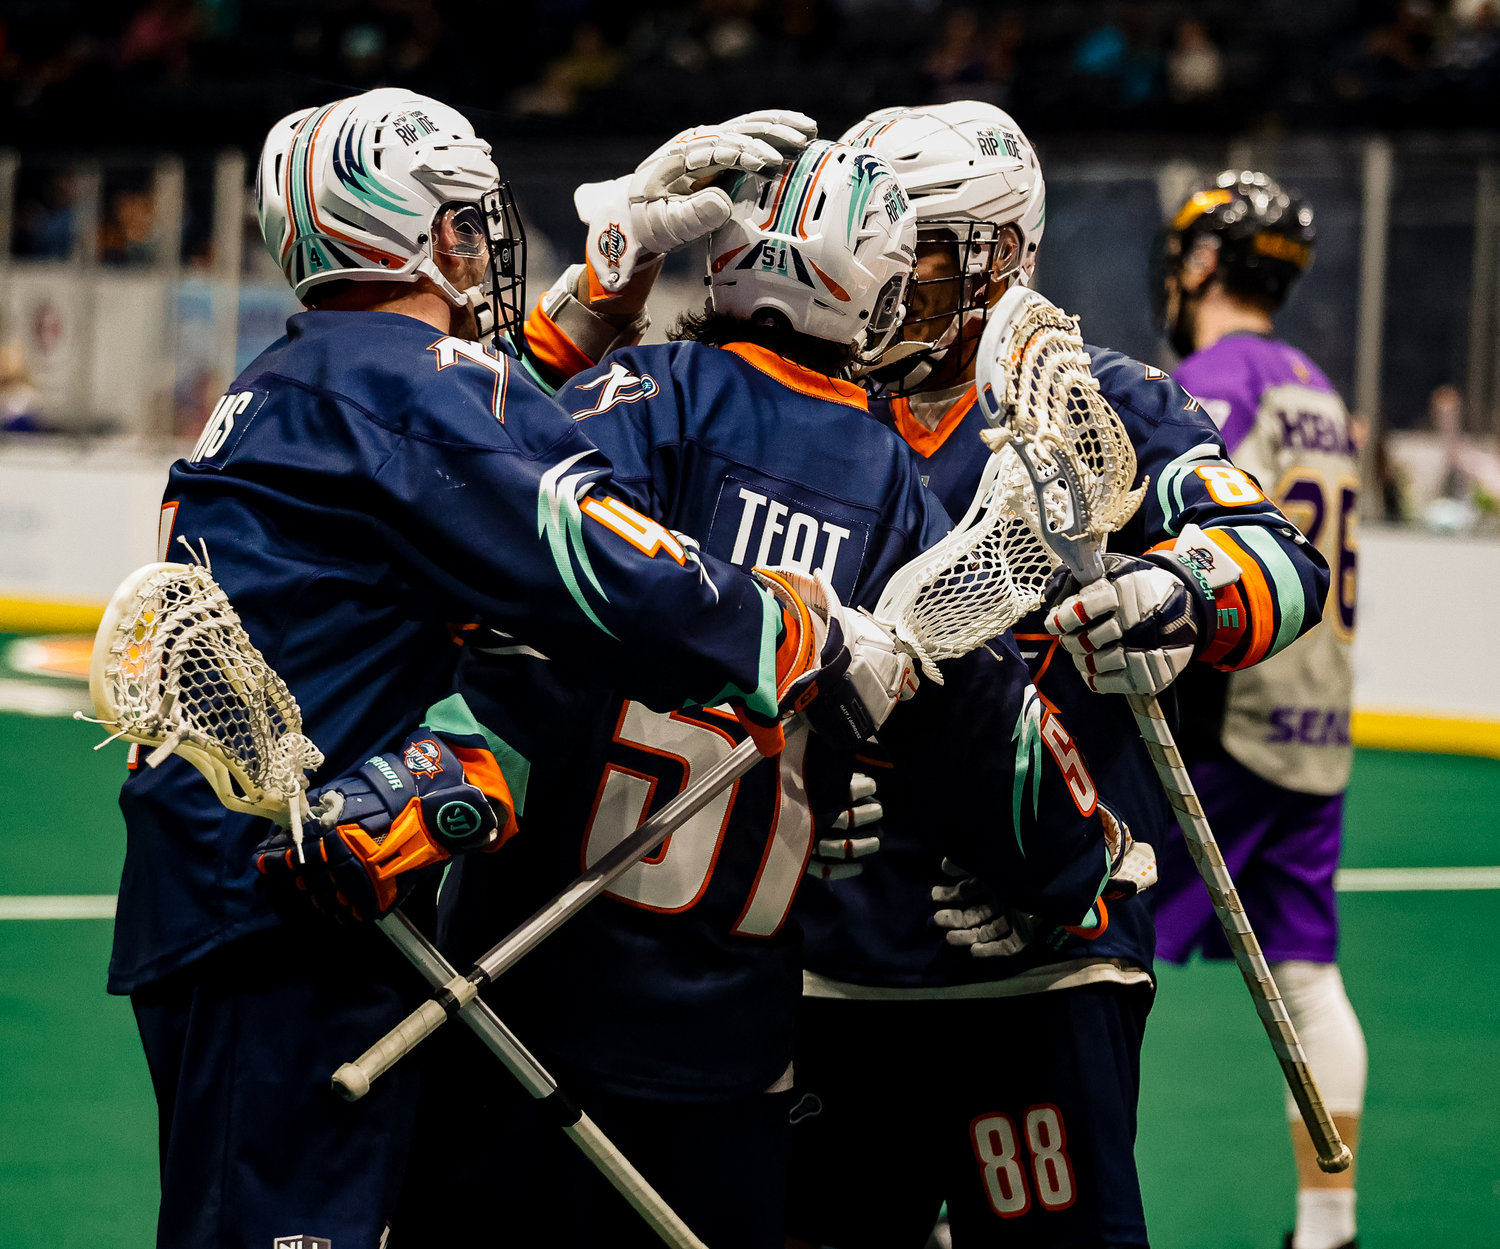 The Riptide celebrated 14 goals in its season opener but fell just short against San Diego.